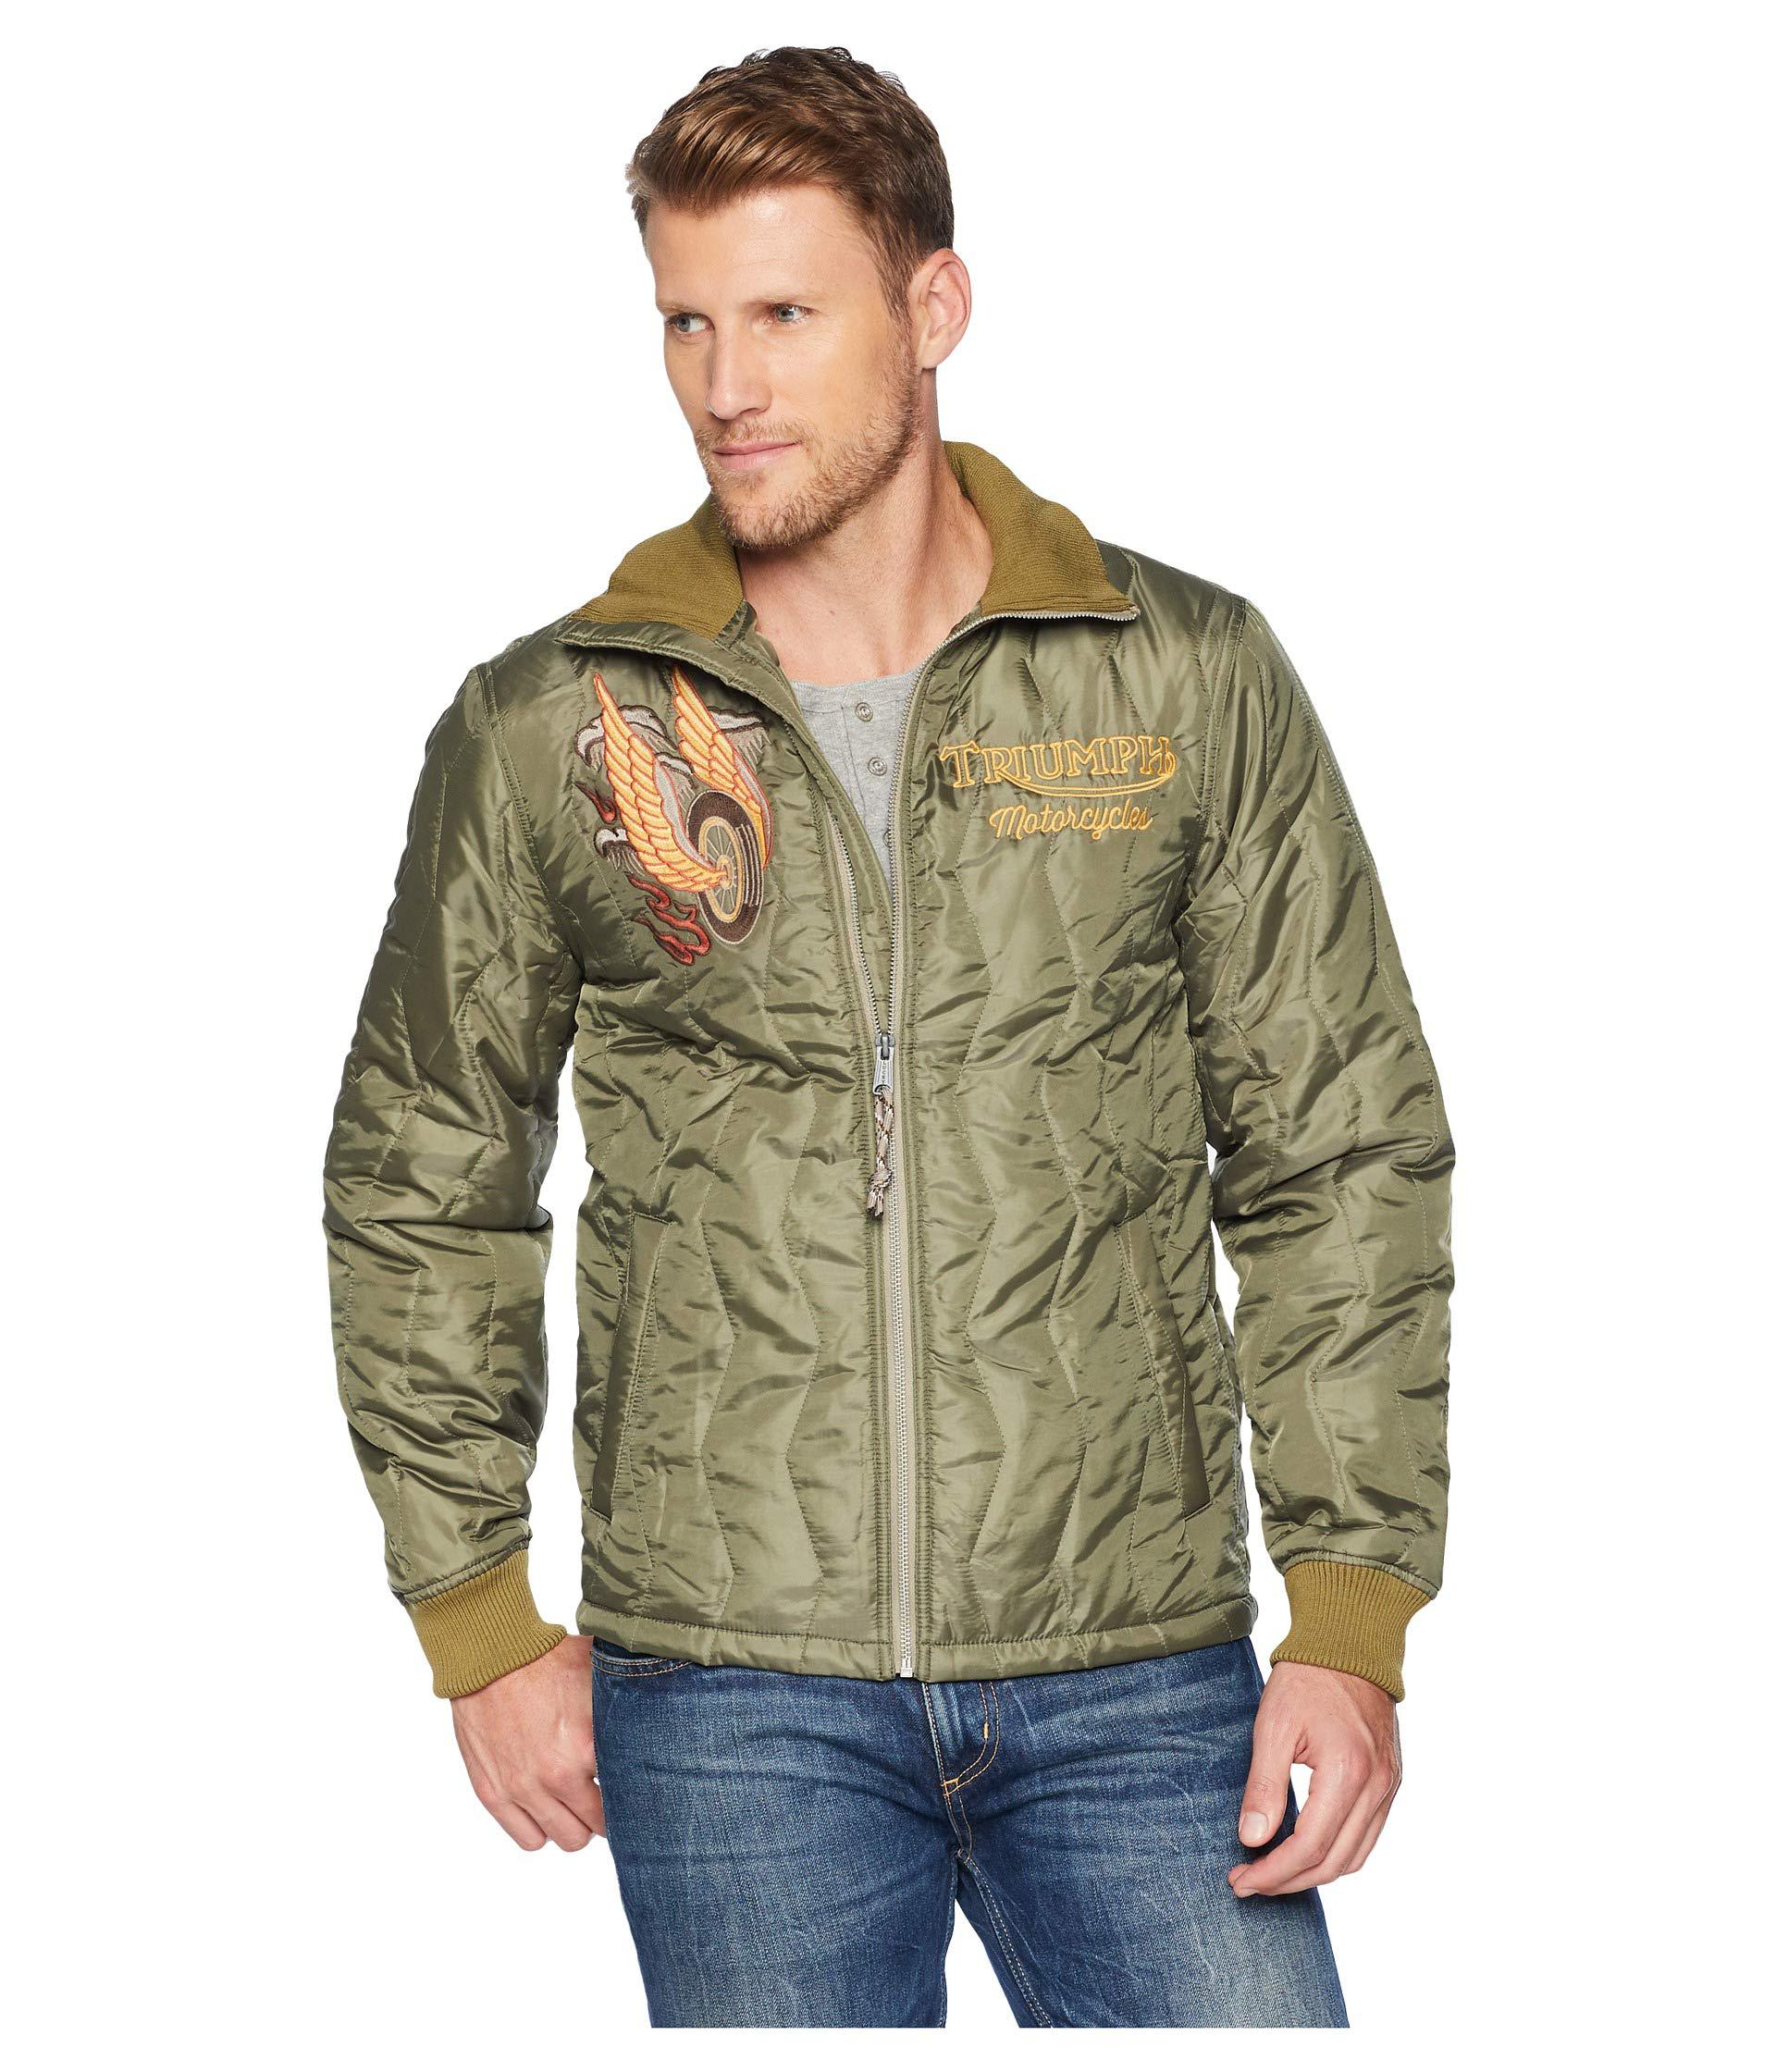 Men\'s Embroidered Brand Lyst in Tiger Lucky Jacket | (olive) Green Triumph Men Coat for